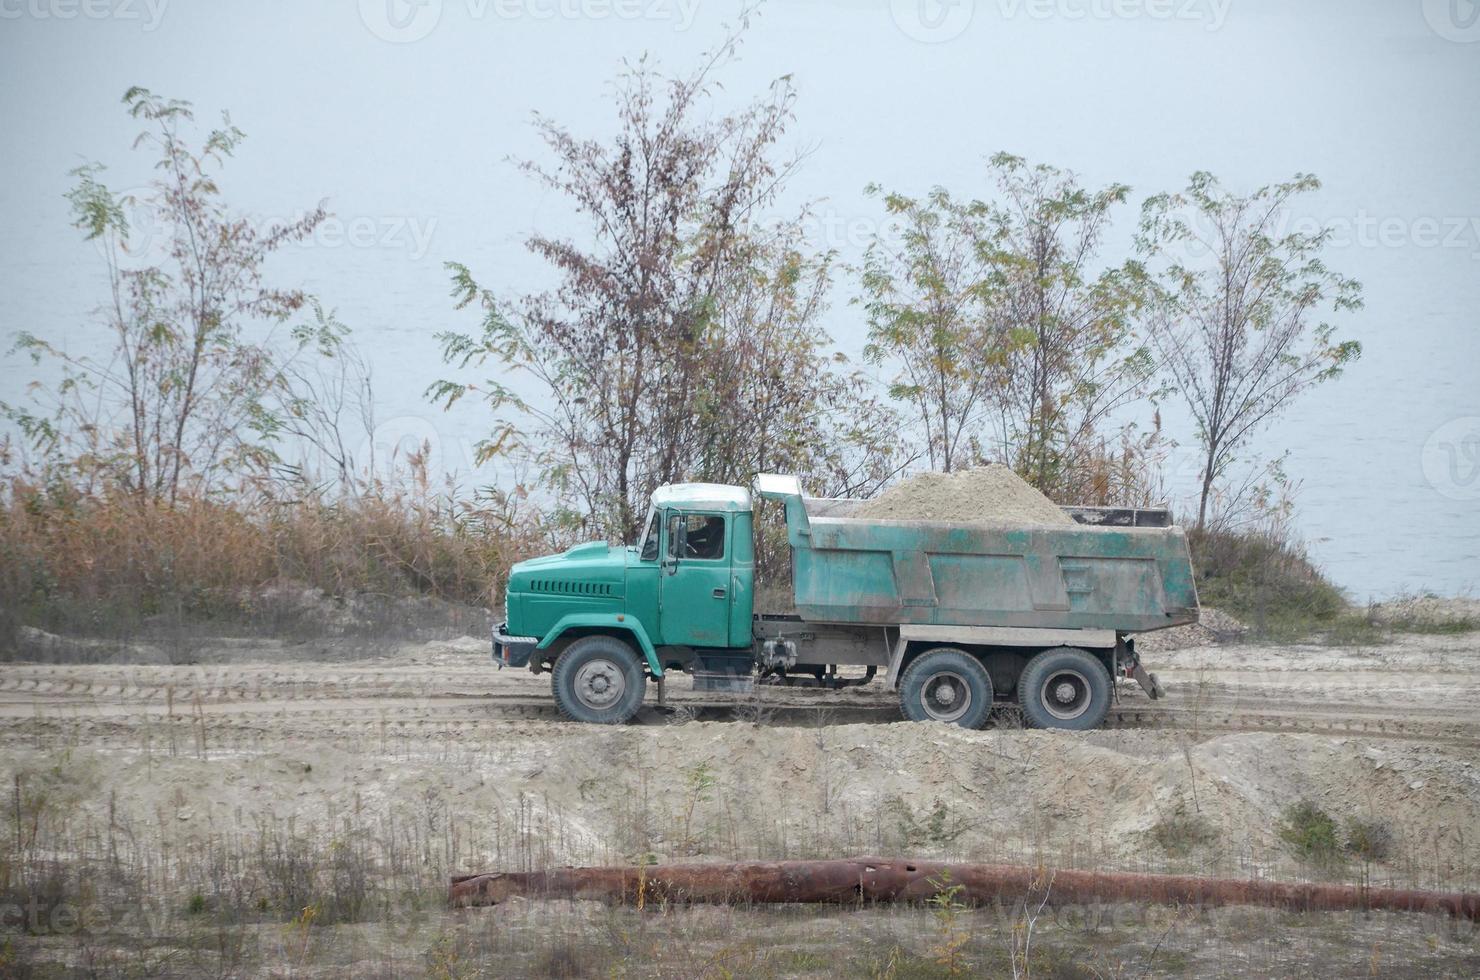 Dump truck transports sand and other minerals in the mining quarry. Heavy industry photo